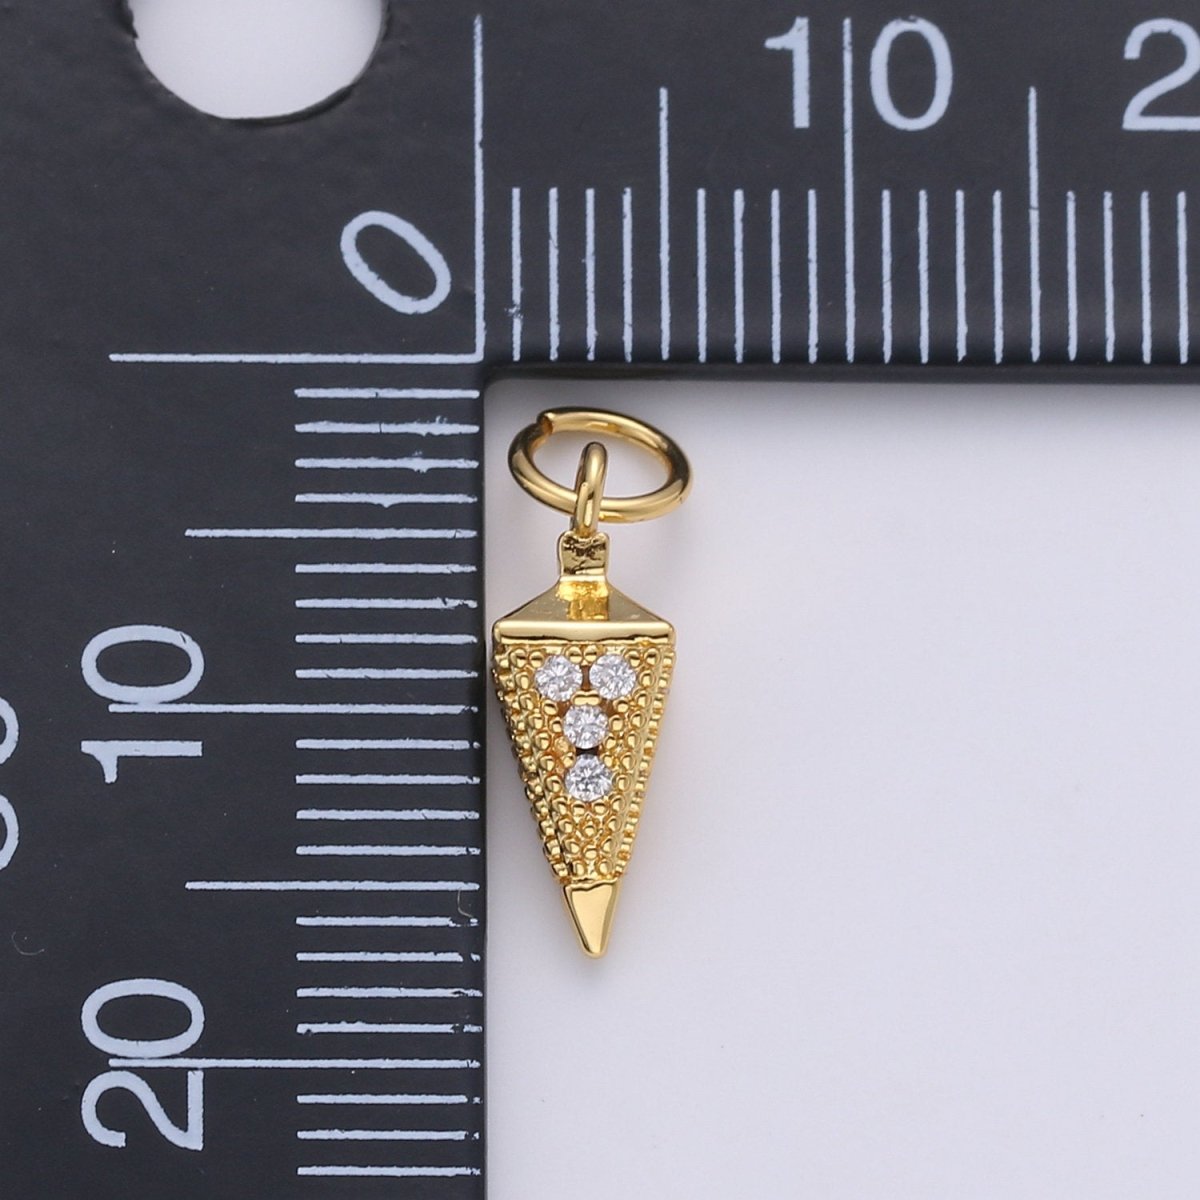 Tiny Pendulum charm 24k gold Filled Spike Jewelry making, Gold Filled Jewelry component Stud Charm for Bracelet Earring Necklace Supply D-260 D-261 - DLUXCA